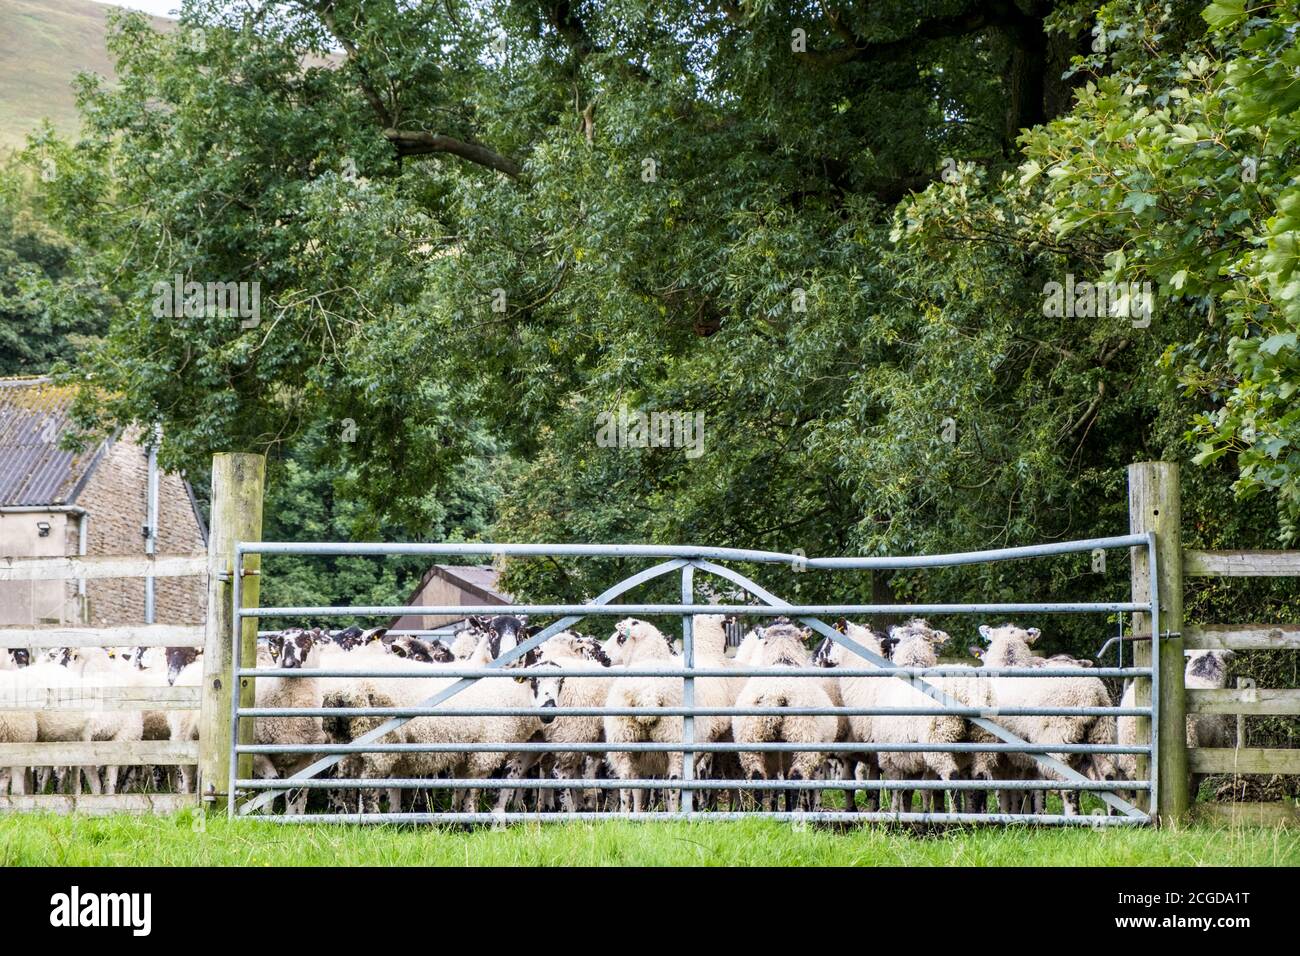 Sheep on a farm in the Vale of Edale, Derbyshire, England, UK Stock Photo